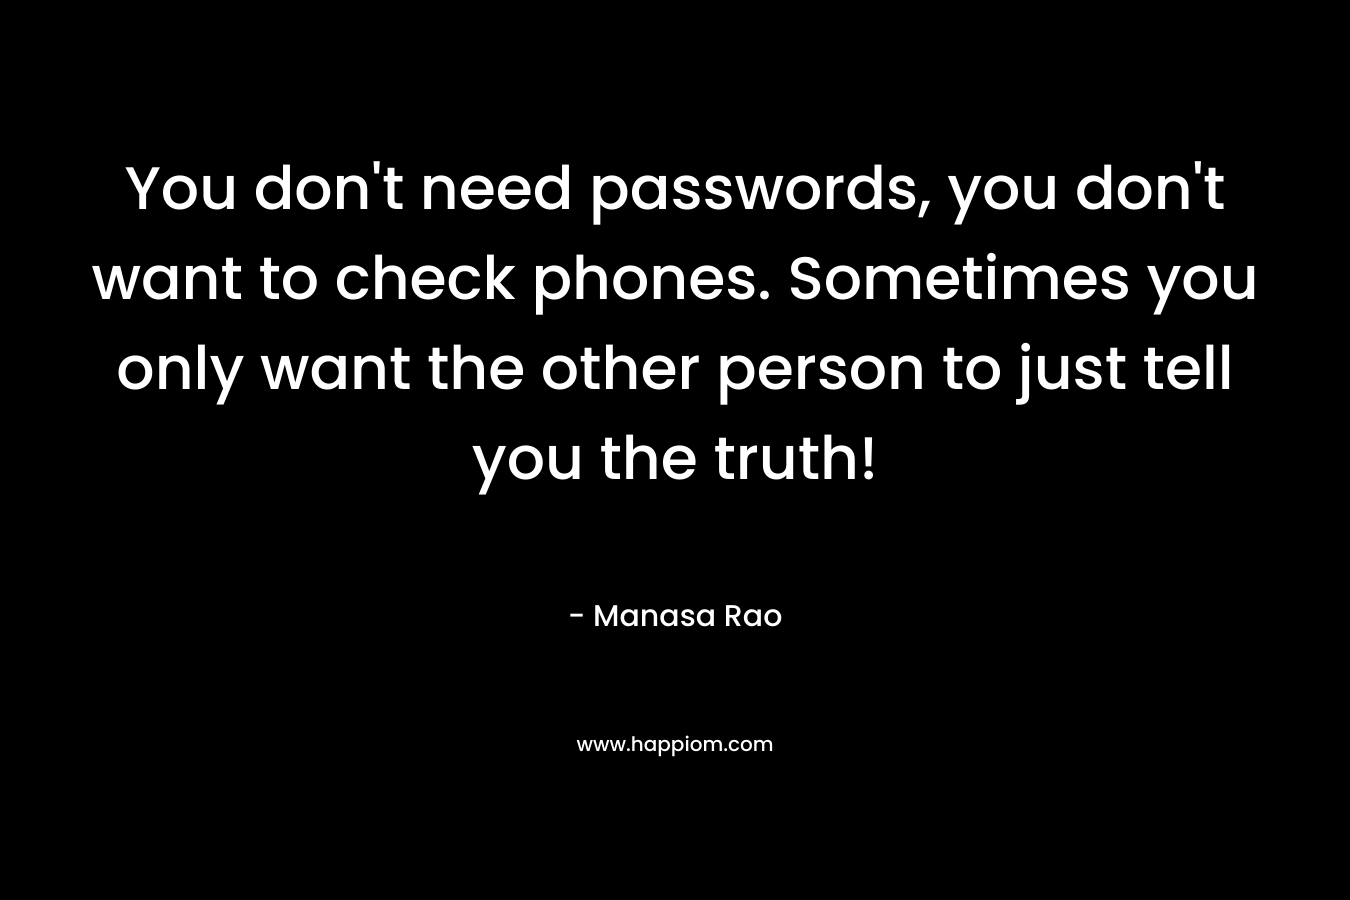 You don't need passwords, you don't want to check phones. Sometimes you only want the other person to just tell you the truth!